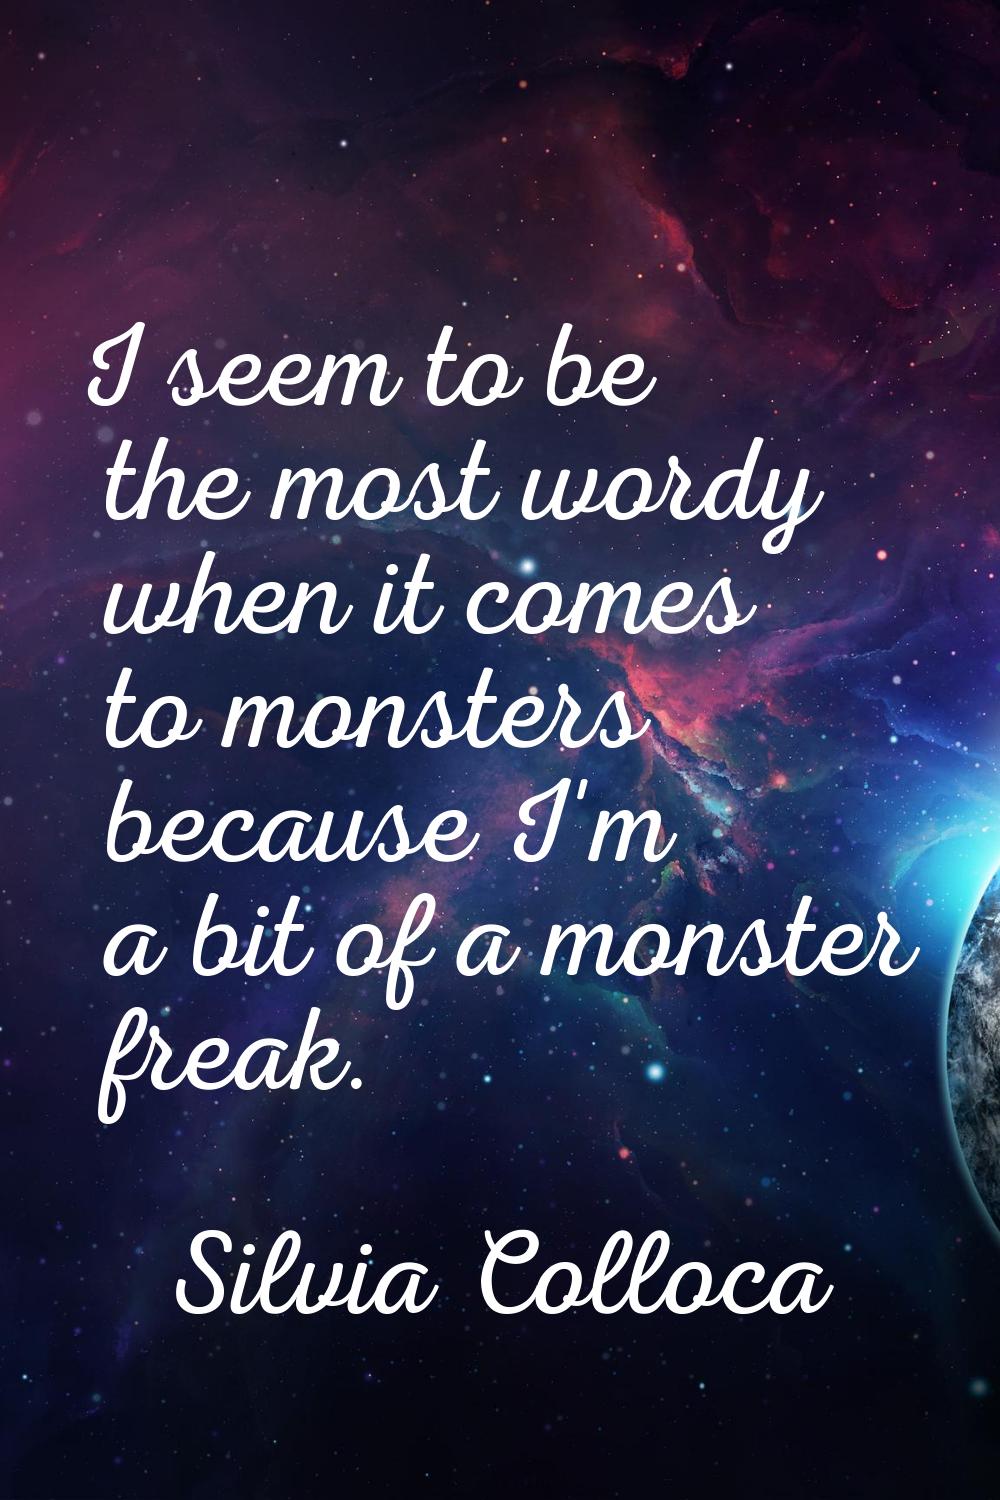 I seem to be the most wordy when it comes to monsters because I'm a bit of a monster freak.